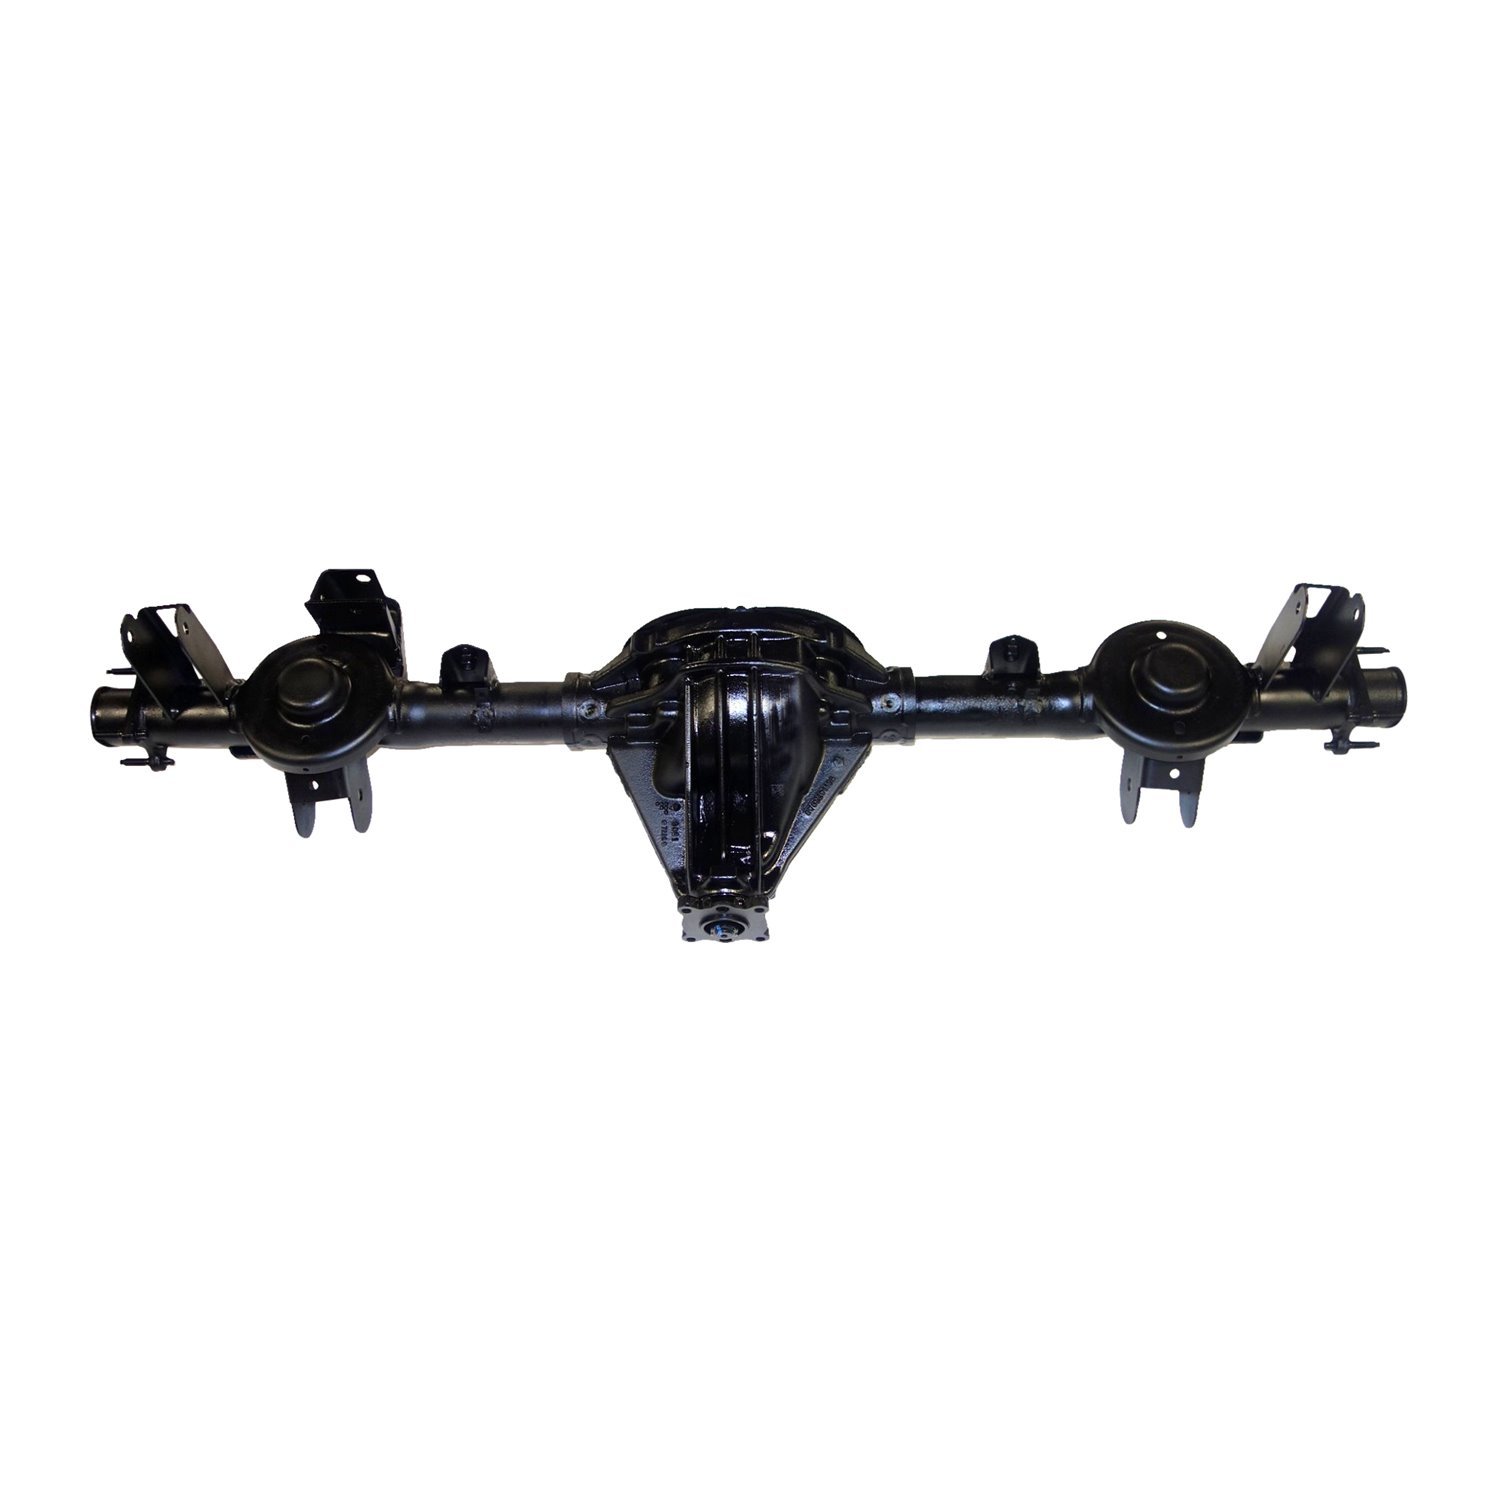 Remanufactured Rear Axle Assy 2006-2007 Chy Liberty 8.25" 3.73